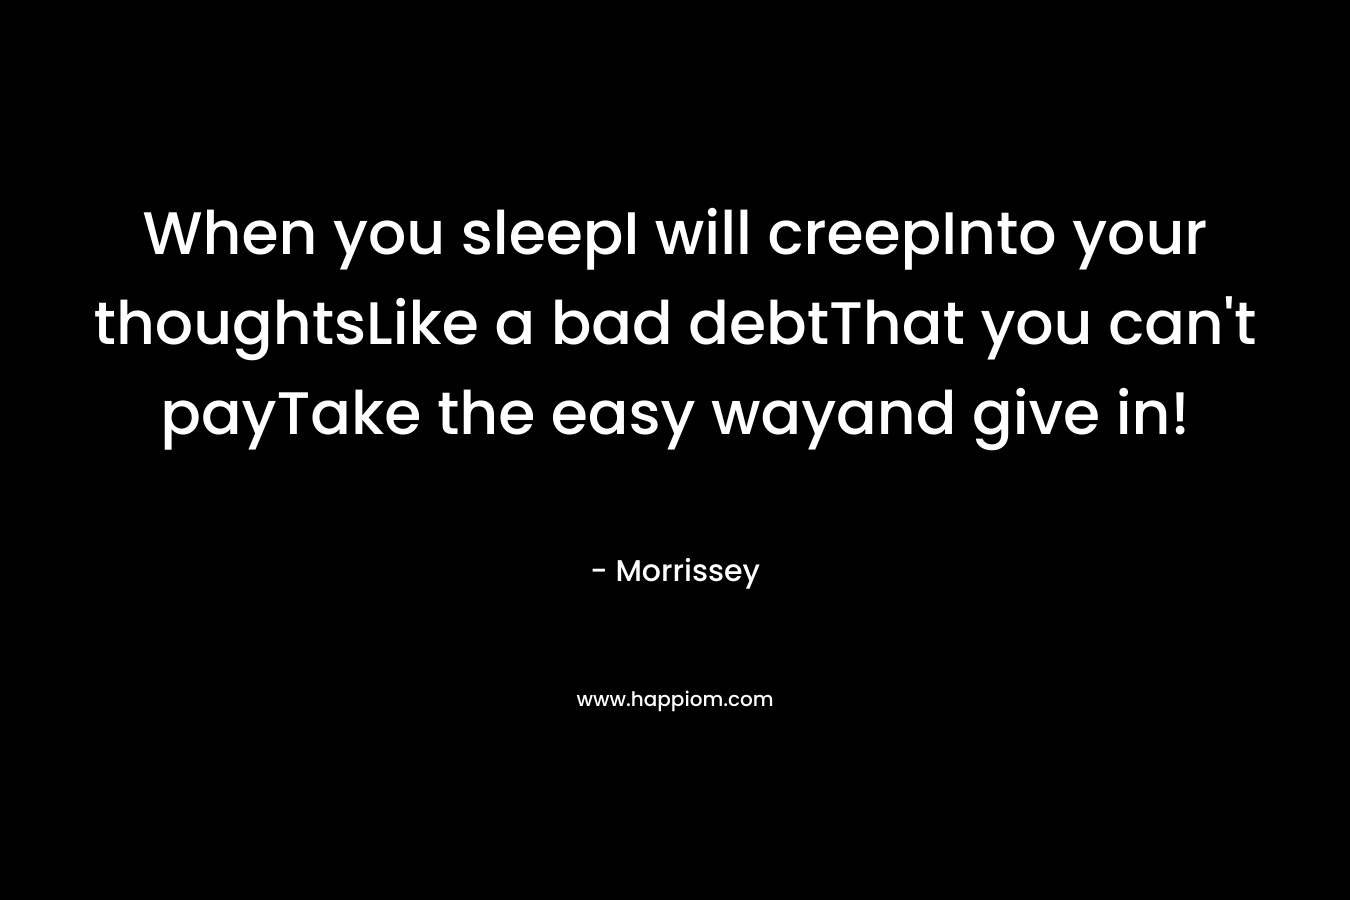 When you sleepI will creepInto your thoughtsLike a bad debtThat you can't payTake the easy wayand give in!